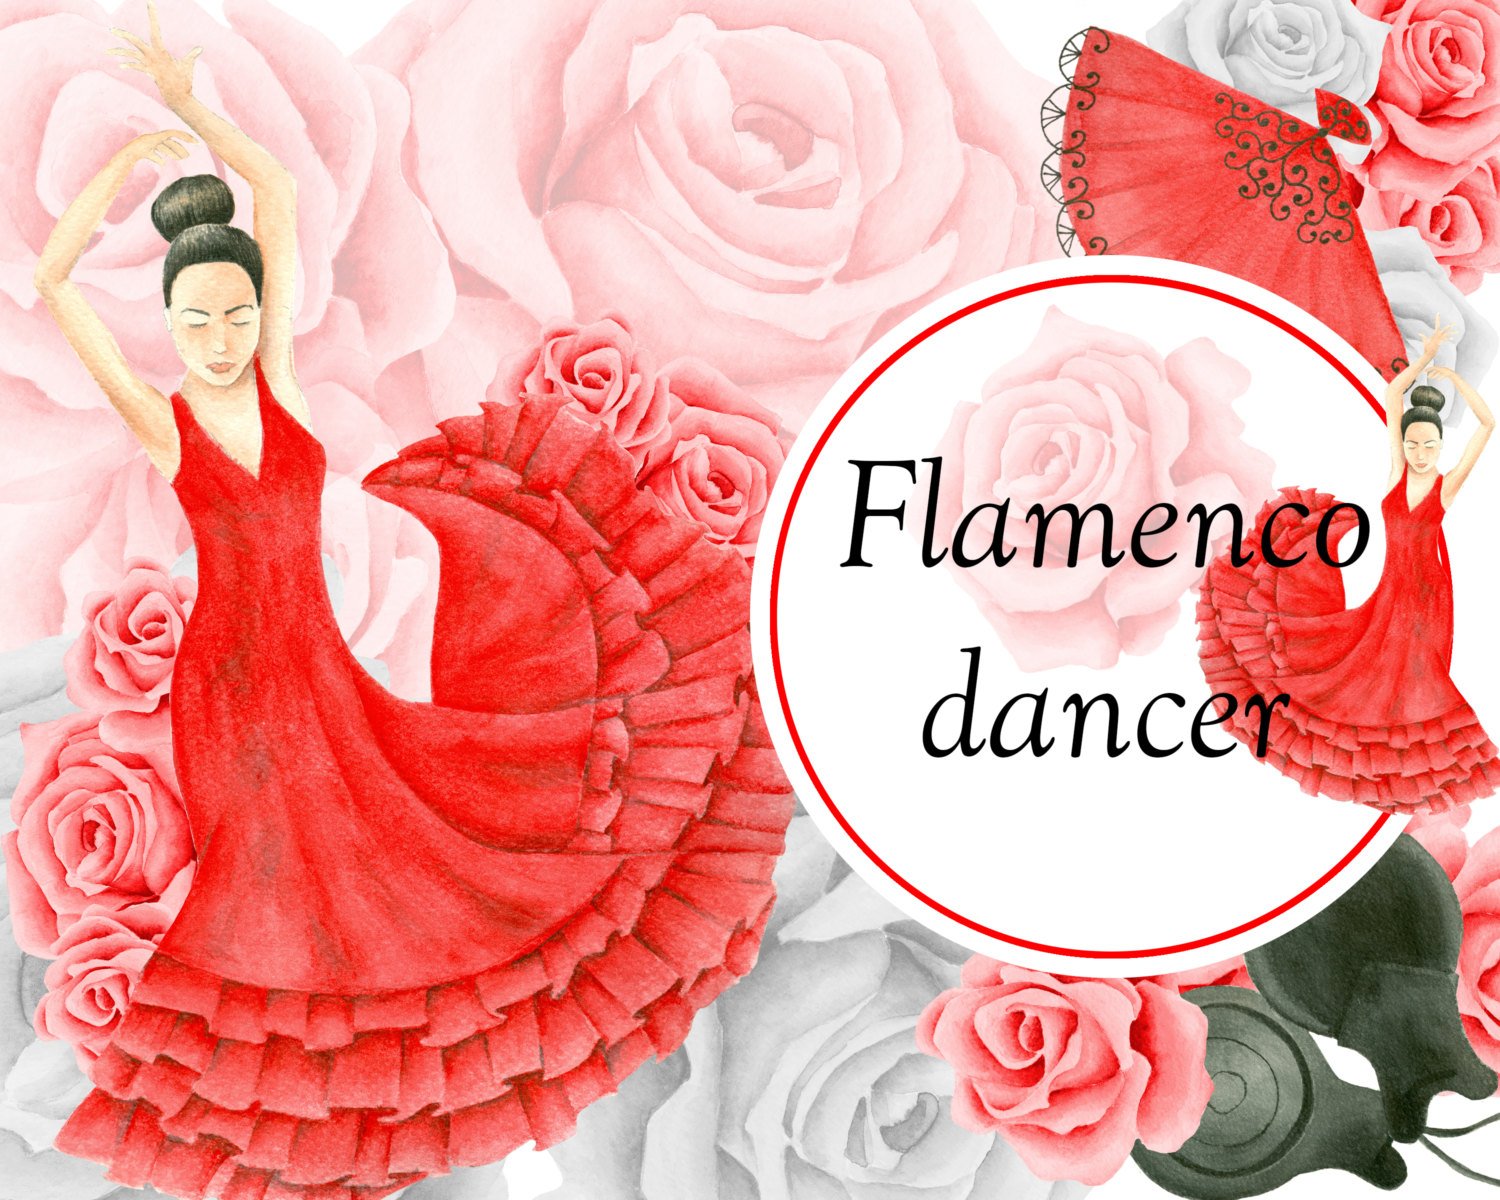 Flamenco in red cover image.